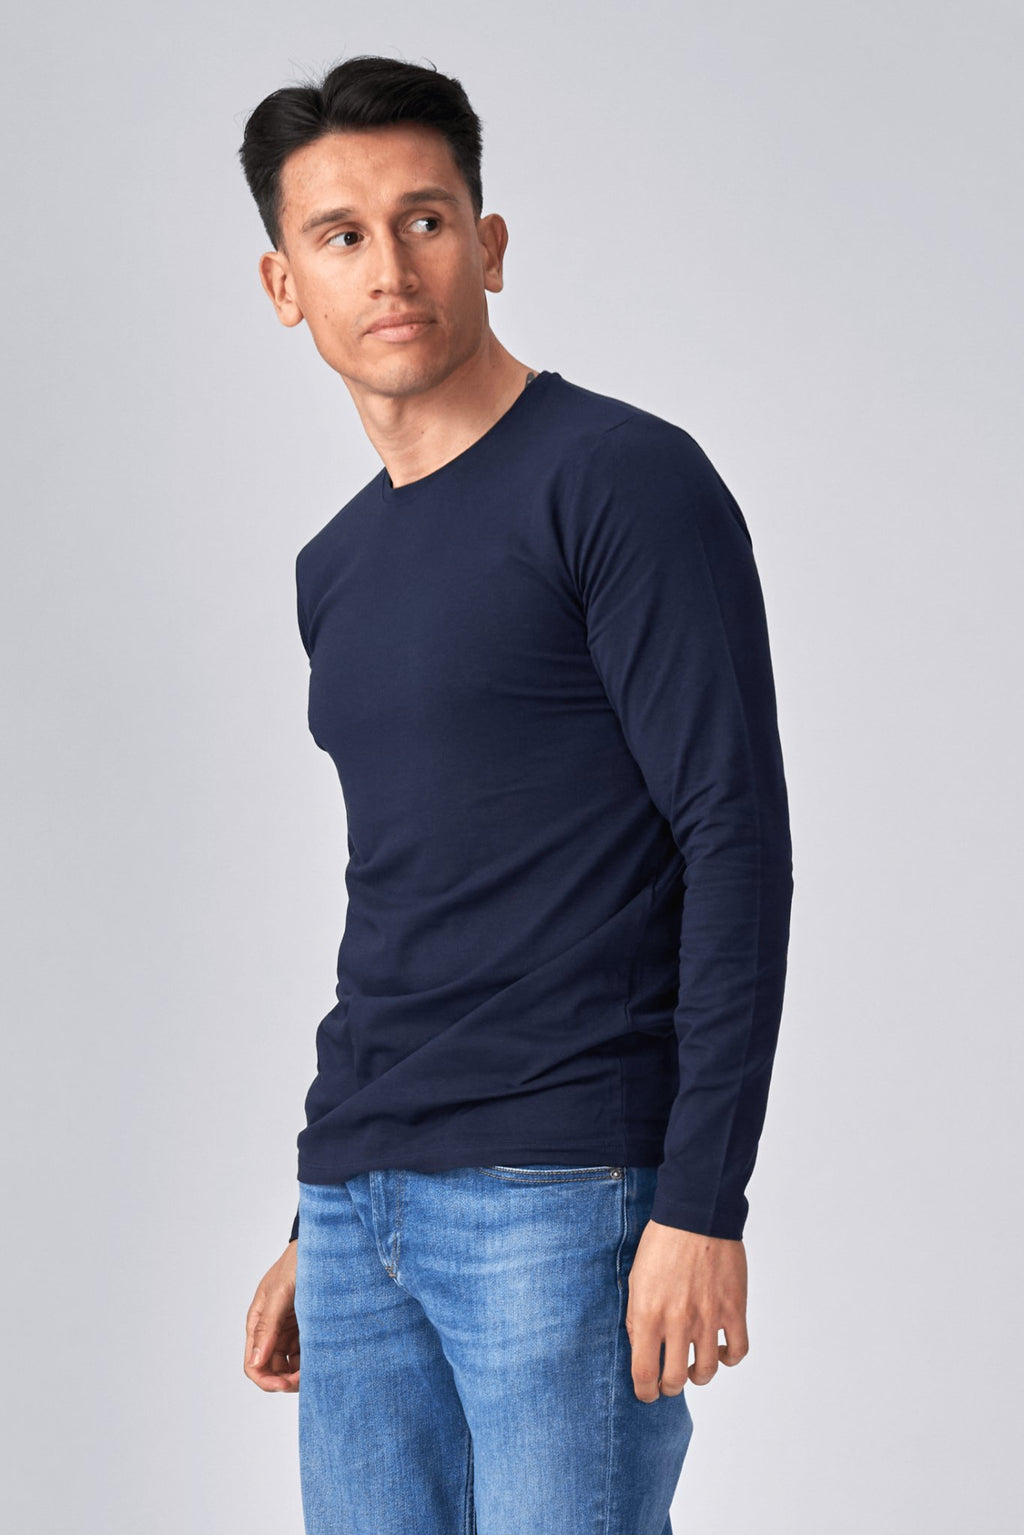 Long-sleeved Muscle T-shirt - Navy